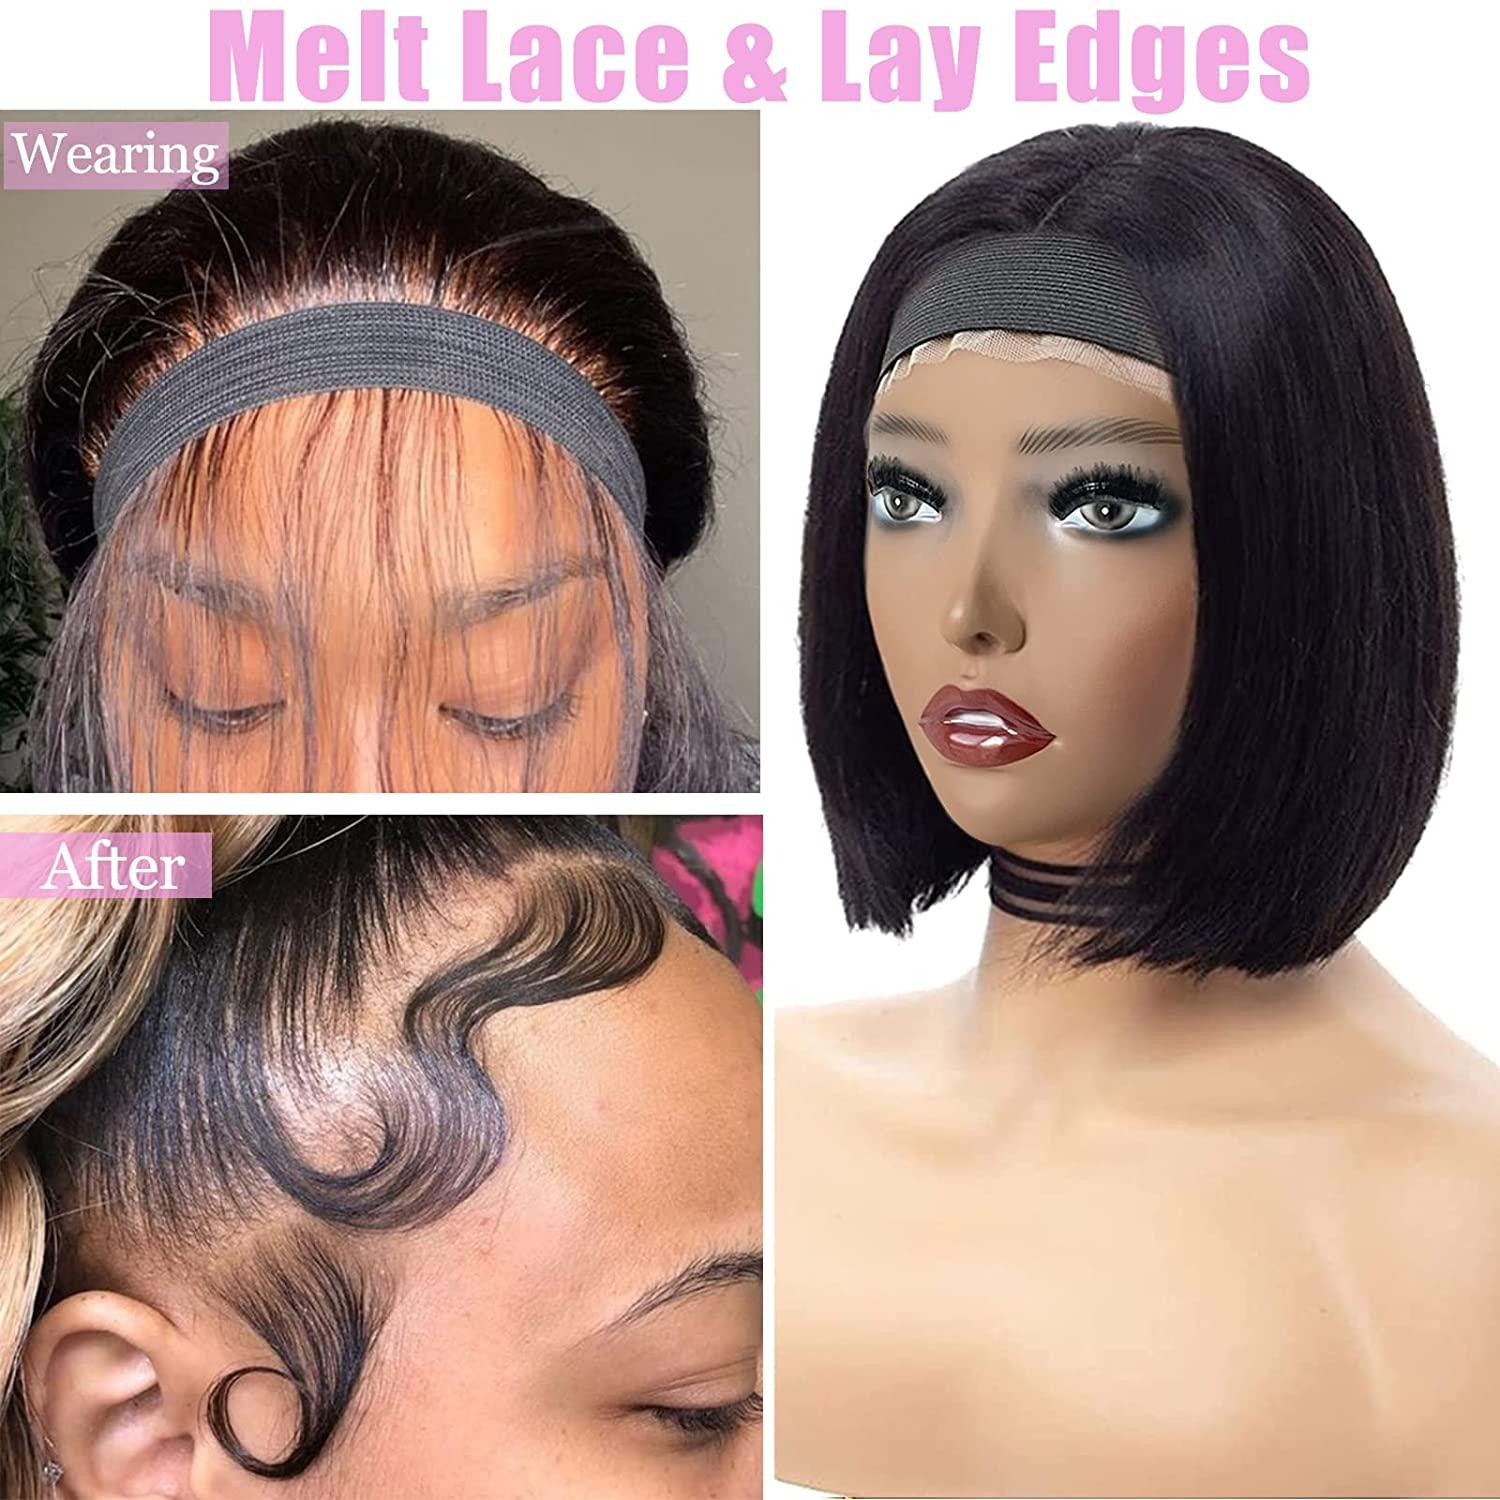 XConstellation Elastic Bands For Wig Band For Edges 2 Pcs Elastic Band For Lace  Frontal Melt Lace Melting Band For Wigs Adjustable Magic Buckle Edge Wrap  To Lay Edges Scarf Keeping Wig